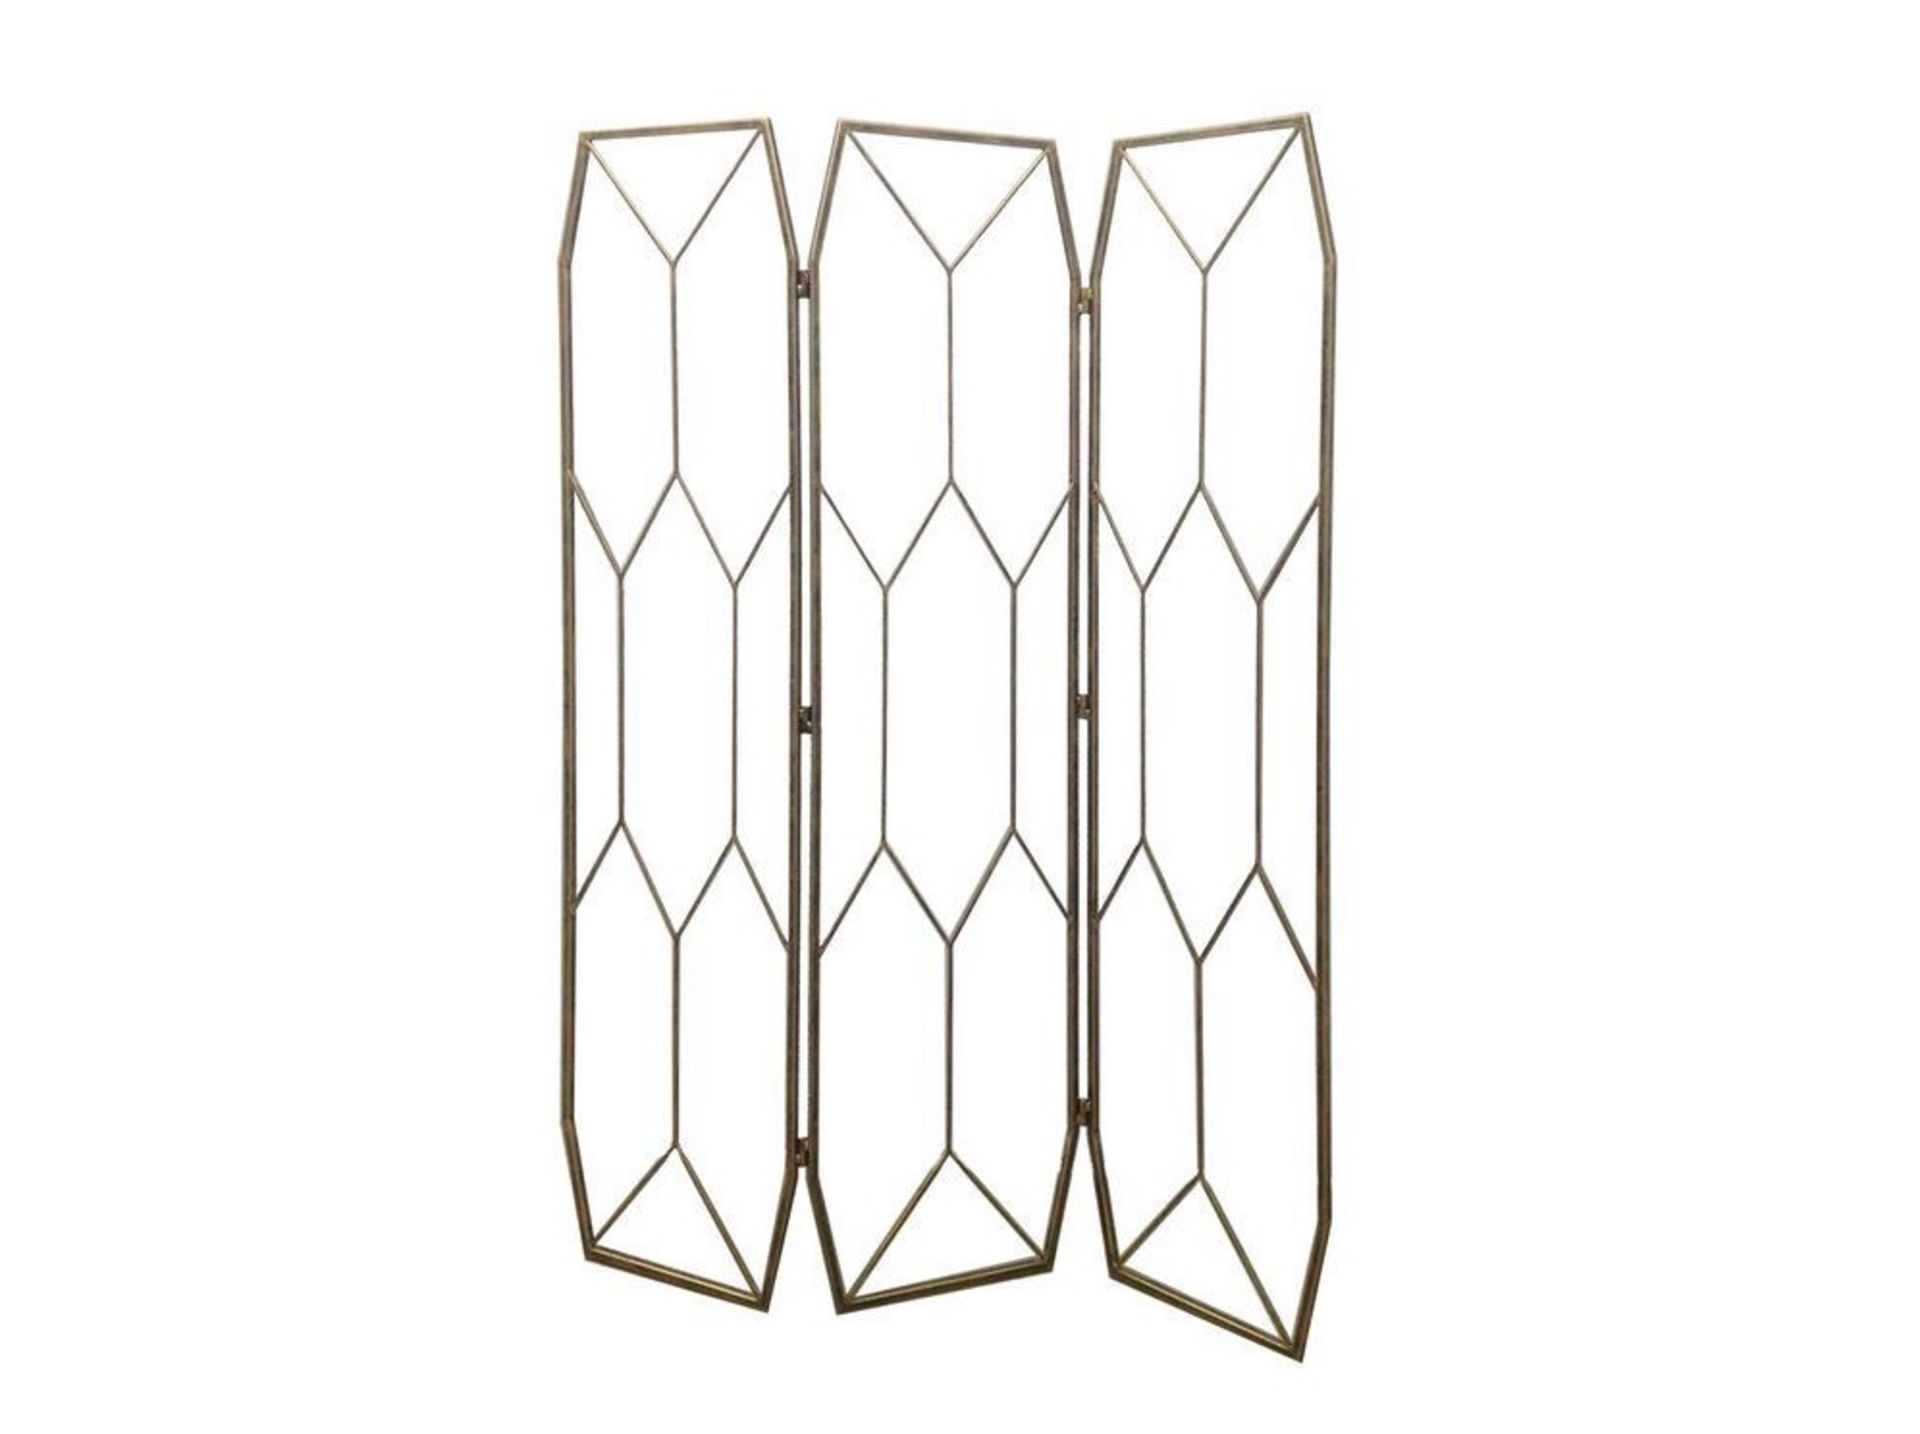 Rhonda Antique Gold Room Screen Capture some geometric art deco style with this 3-panel antique gold